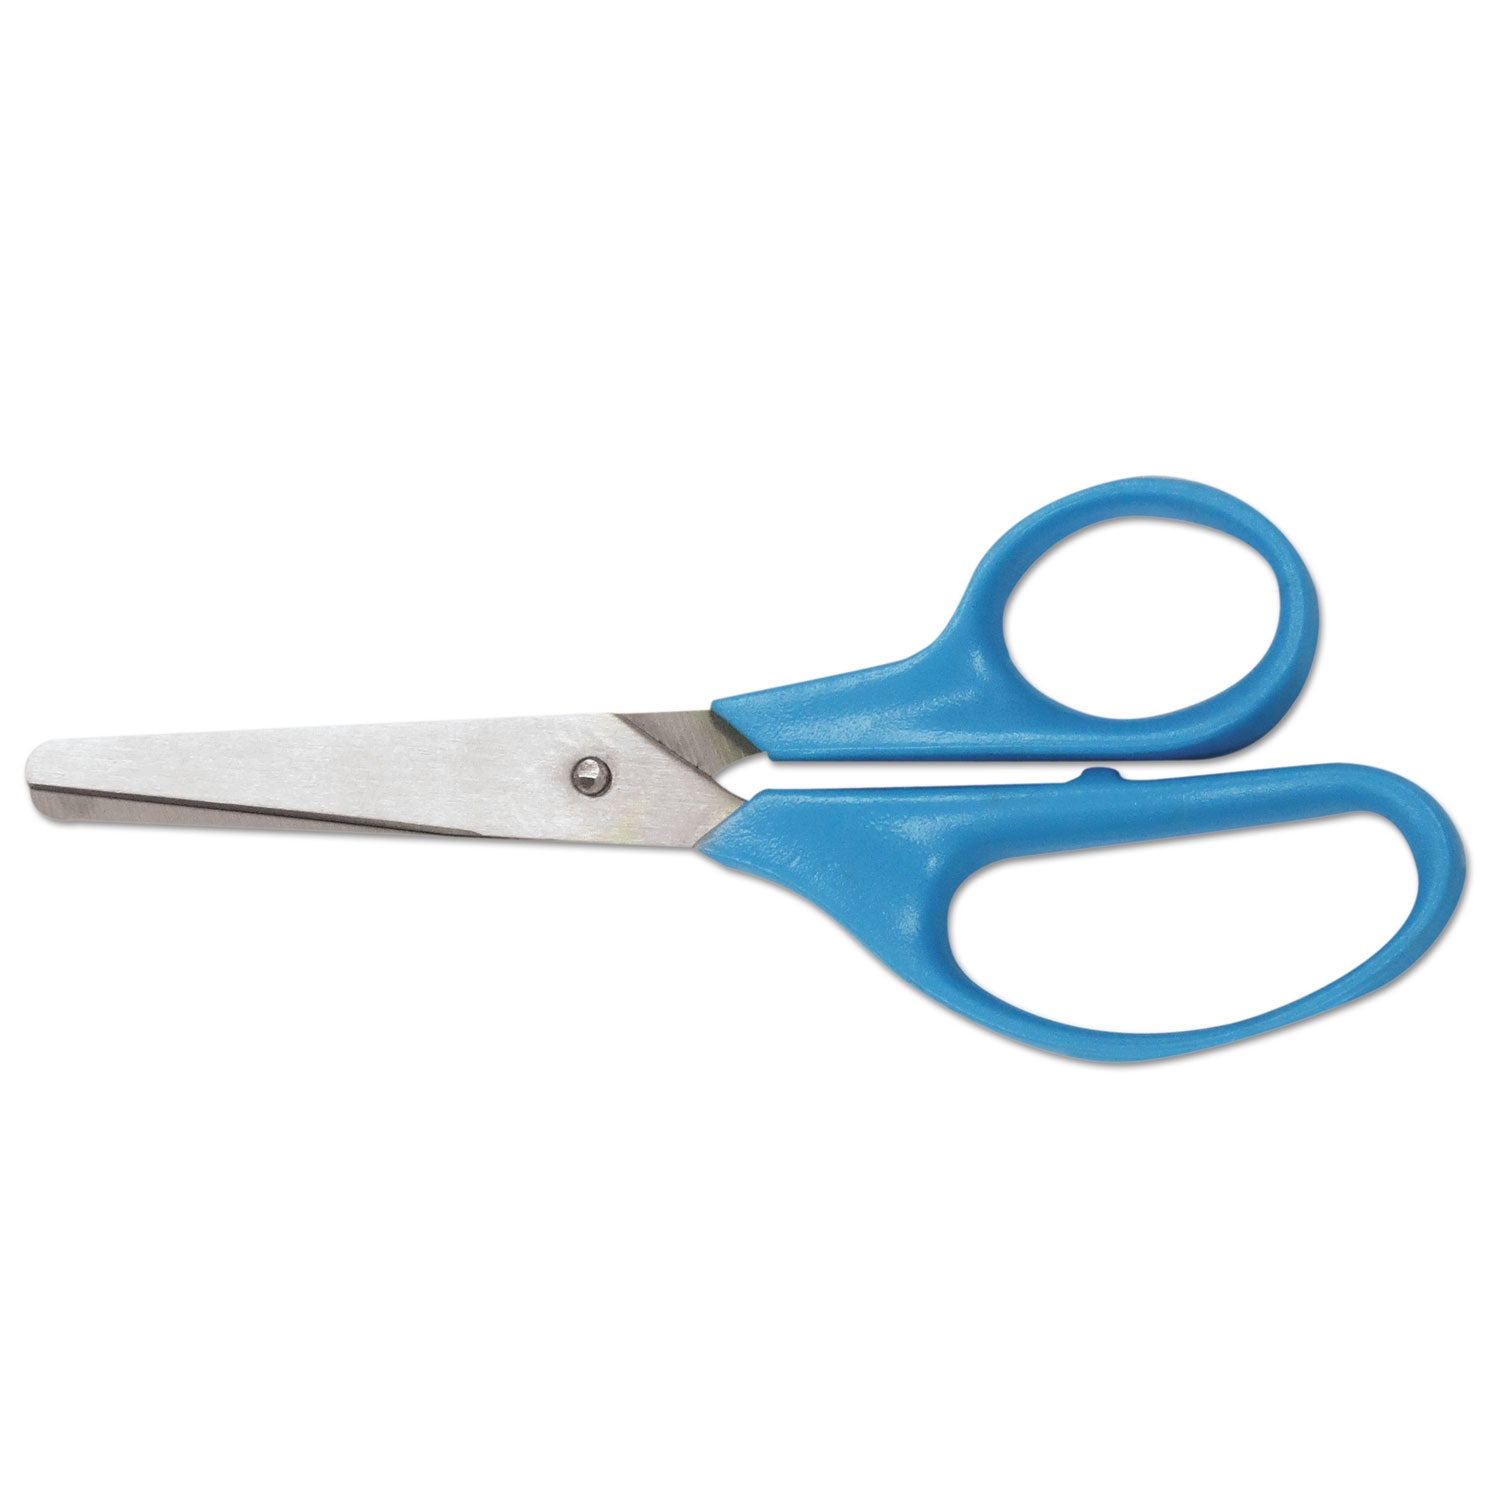 kids-scissors-rounded-tip-5-long-175-cut-length-assorted-straight-handles-2-pack_unv92024 - 2